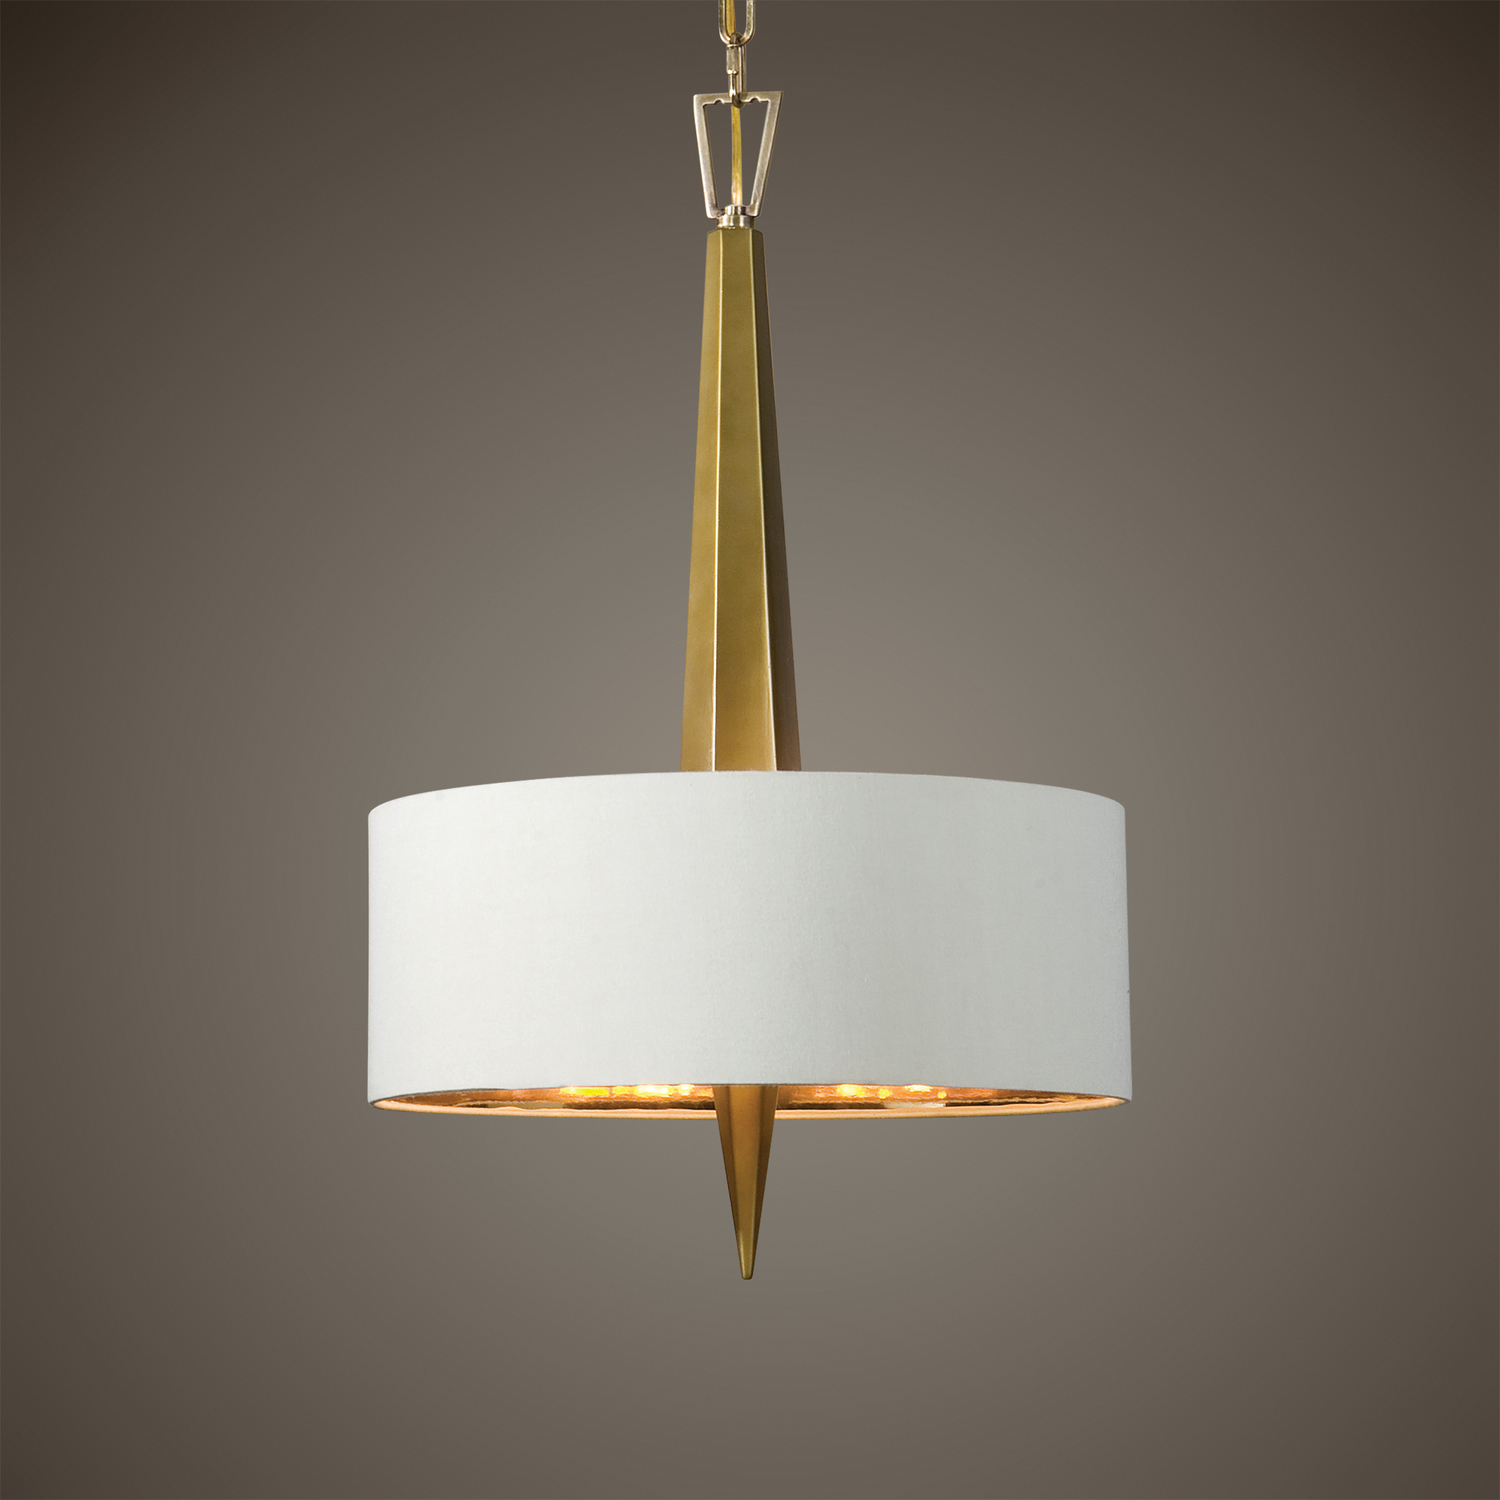 ceiling glass light shades Uttermost Chandeliers Warm Gold Finished Ceramic With Beige Linen Shade.